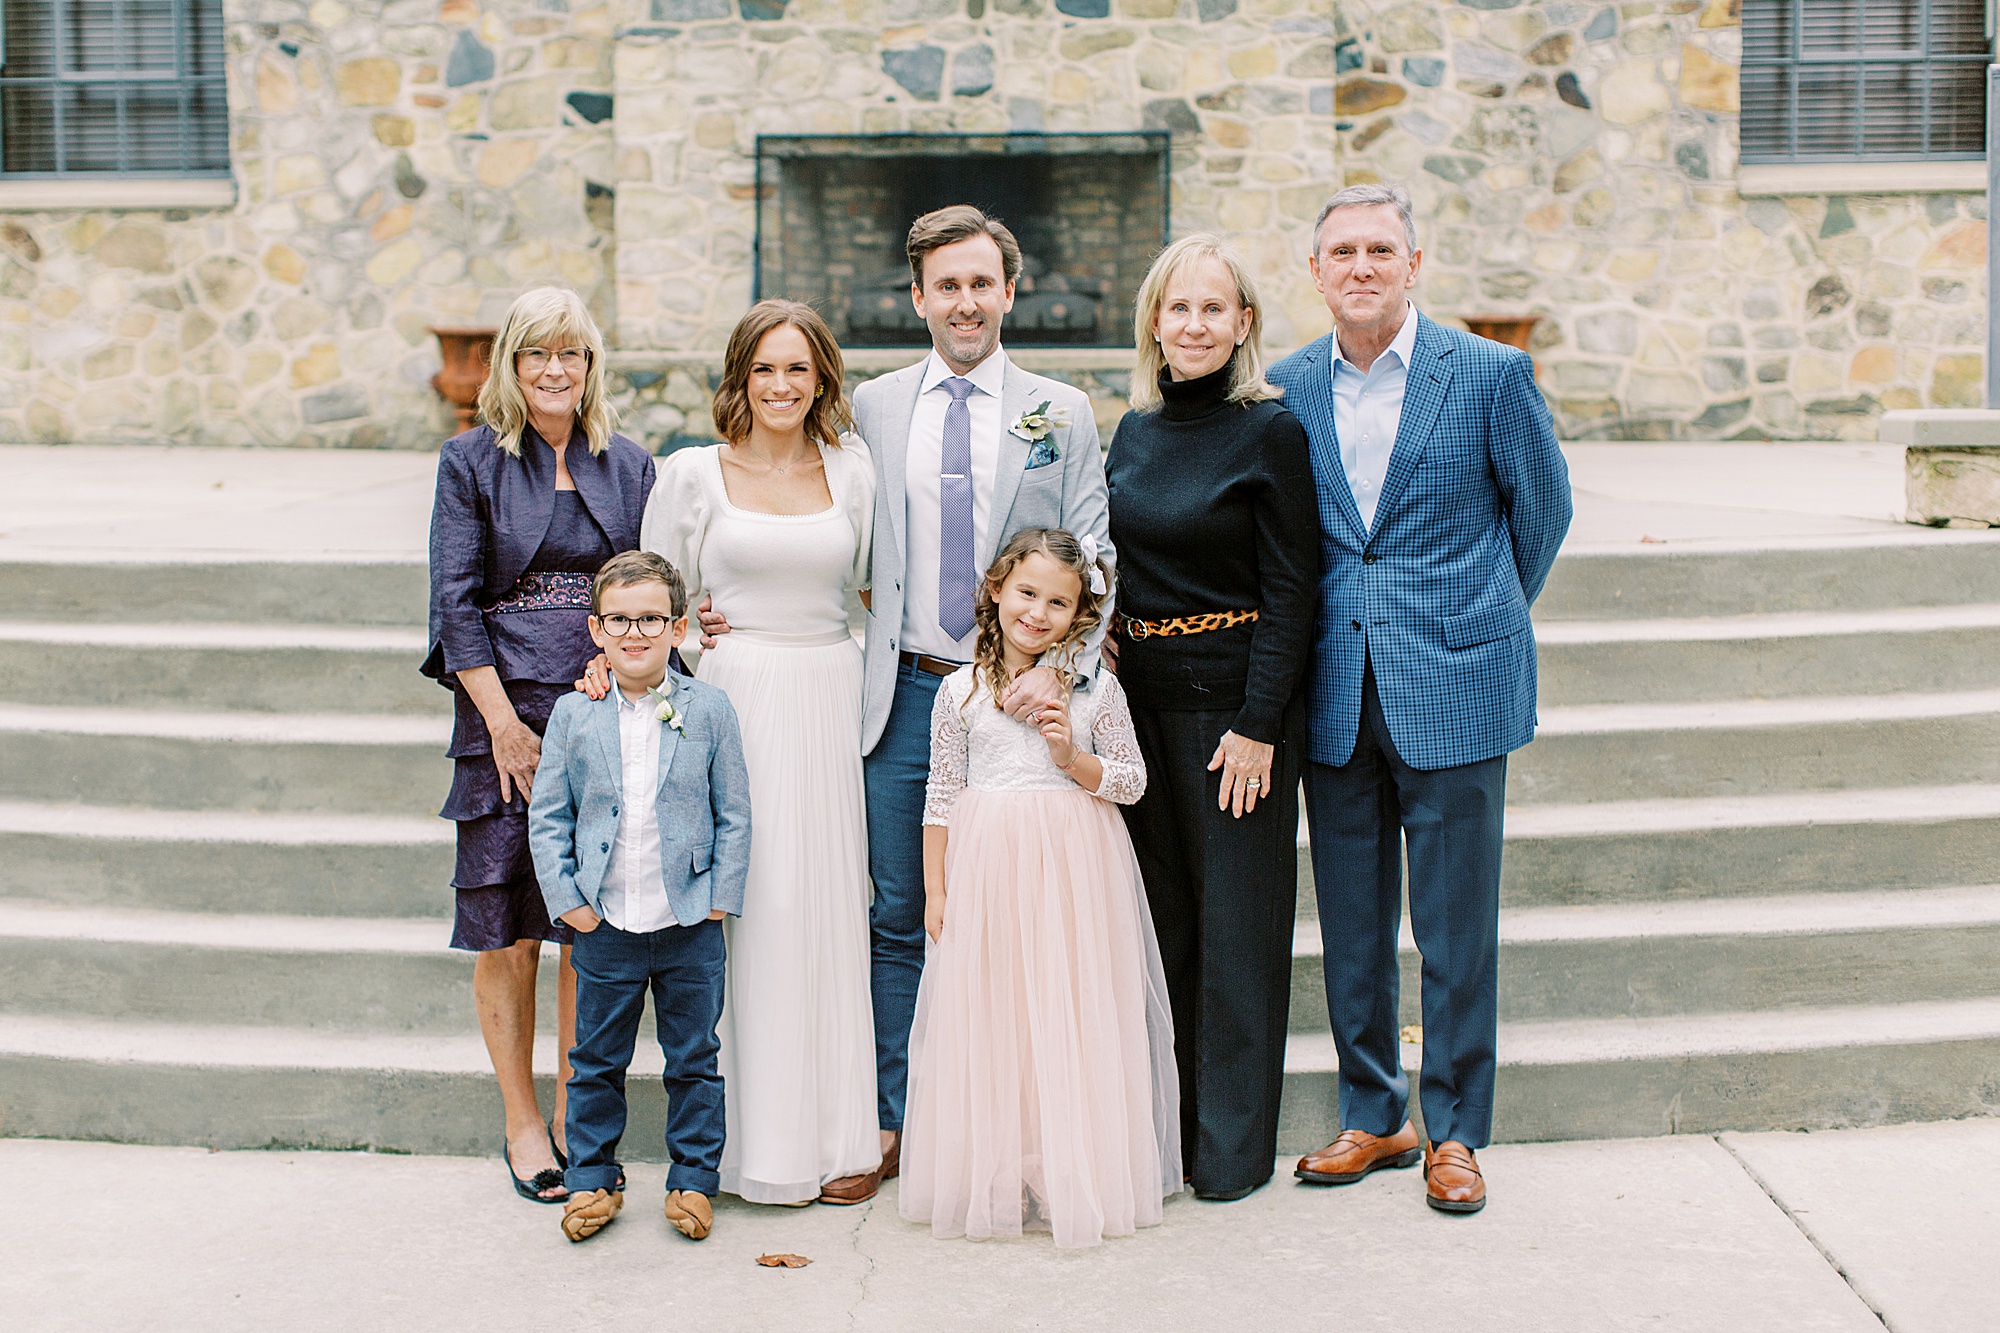 family poses together during vow renewal